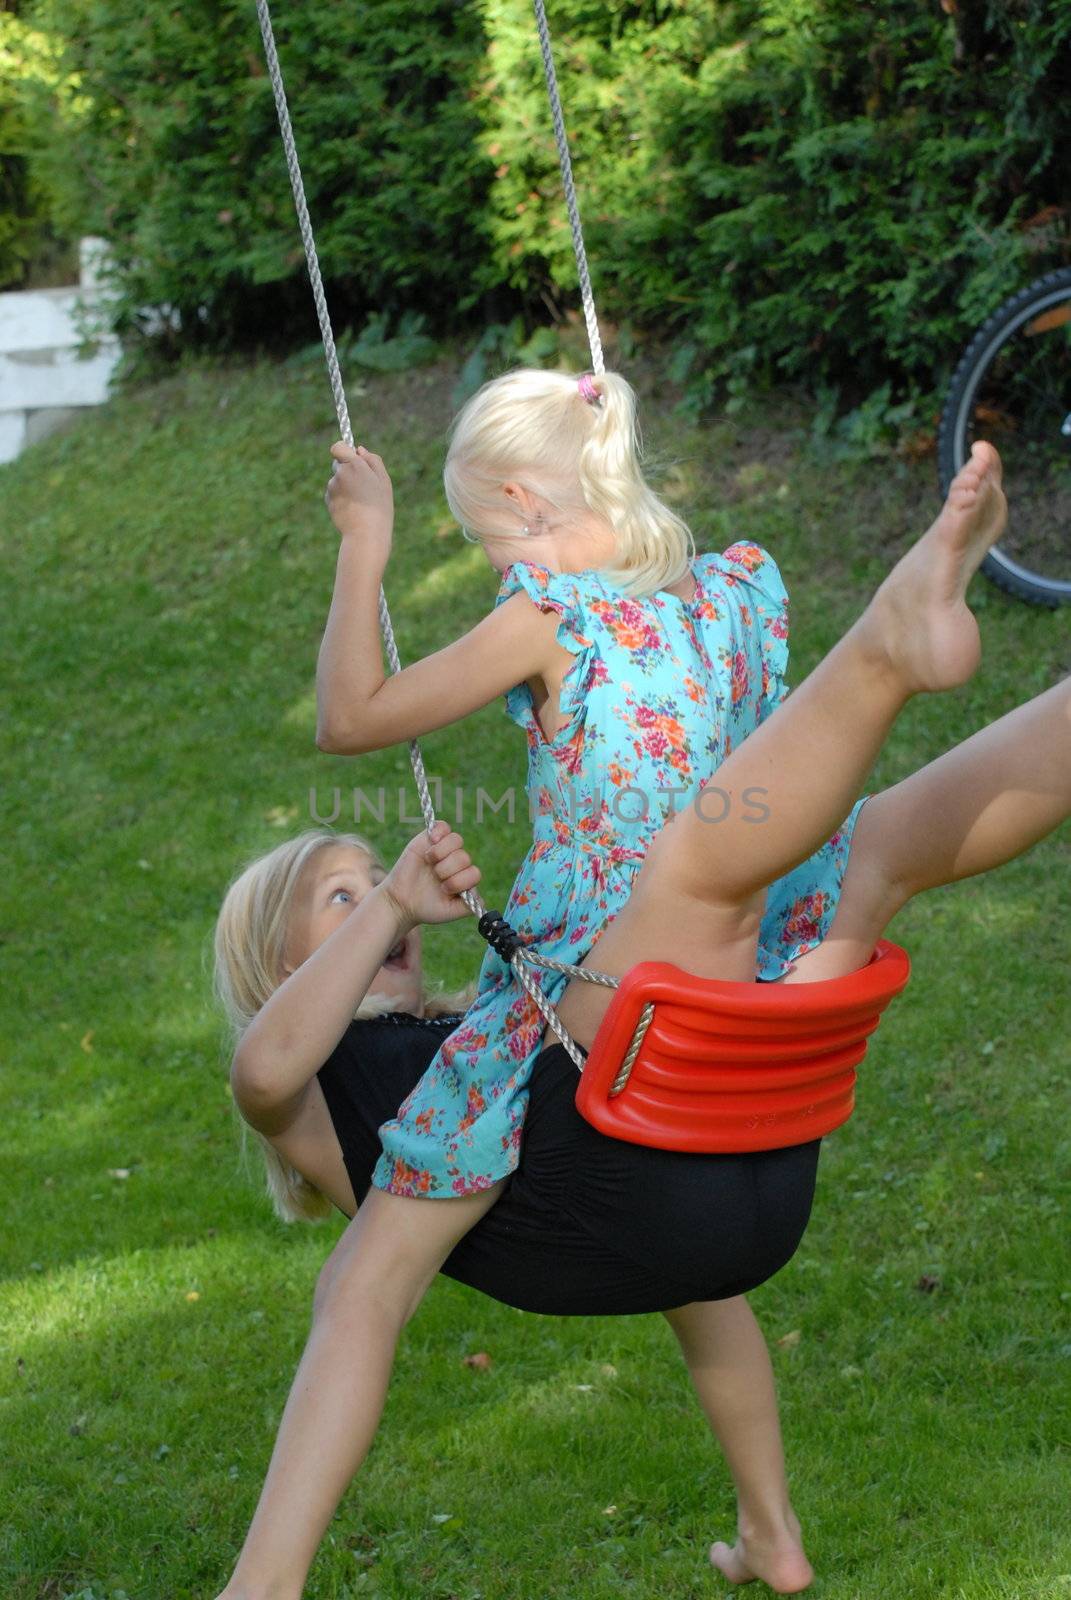 Girls playing on swing in garden. Please note: No negative use allowed